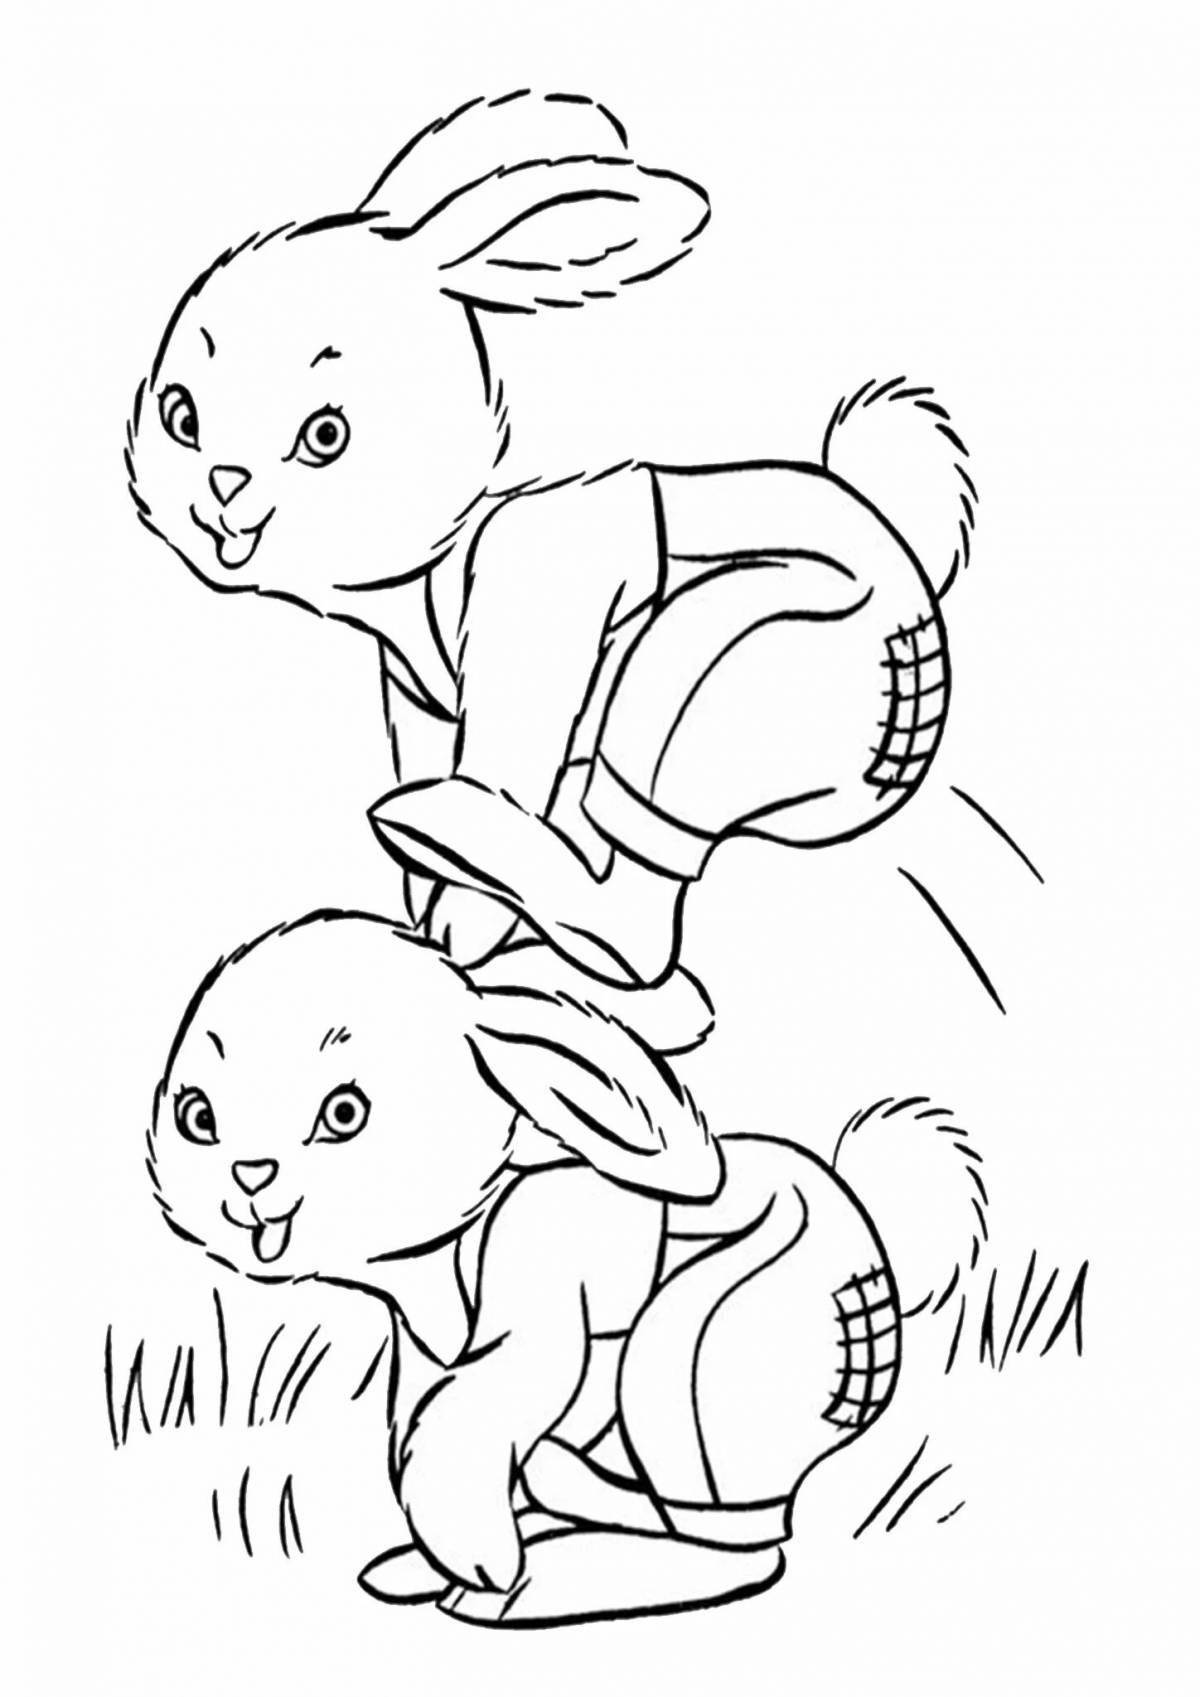 Witty jumping bunny